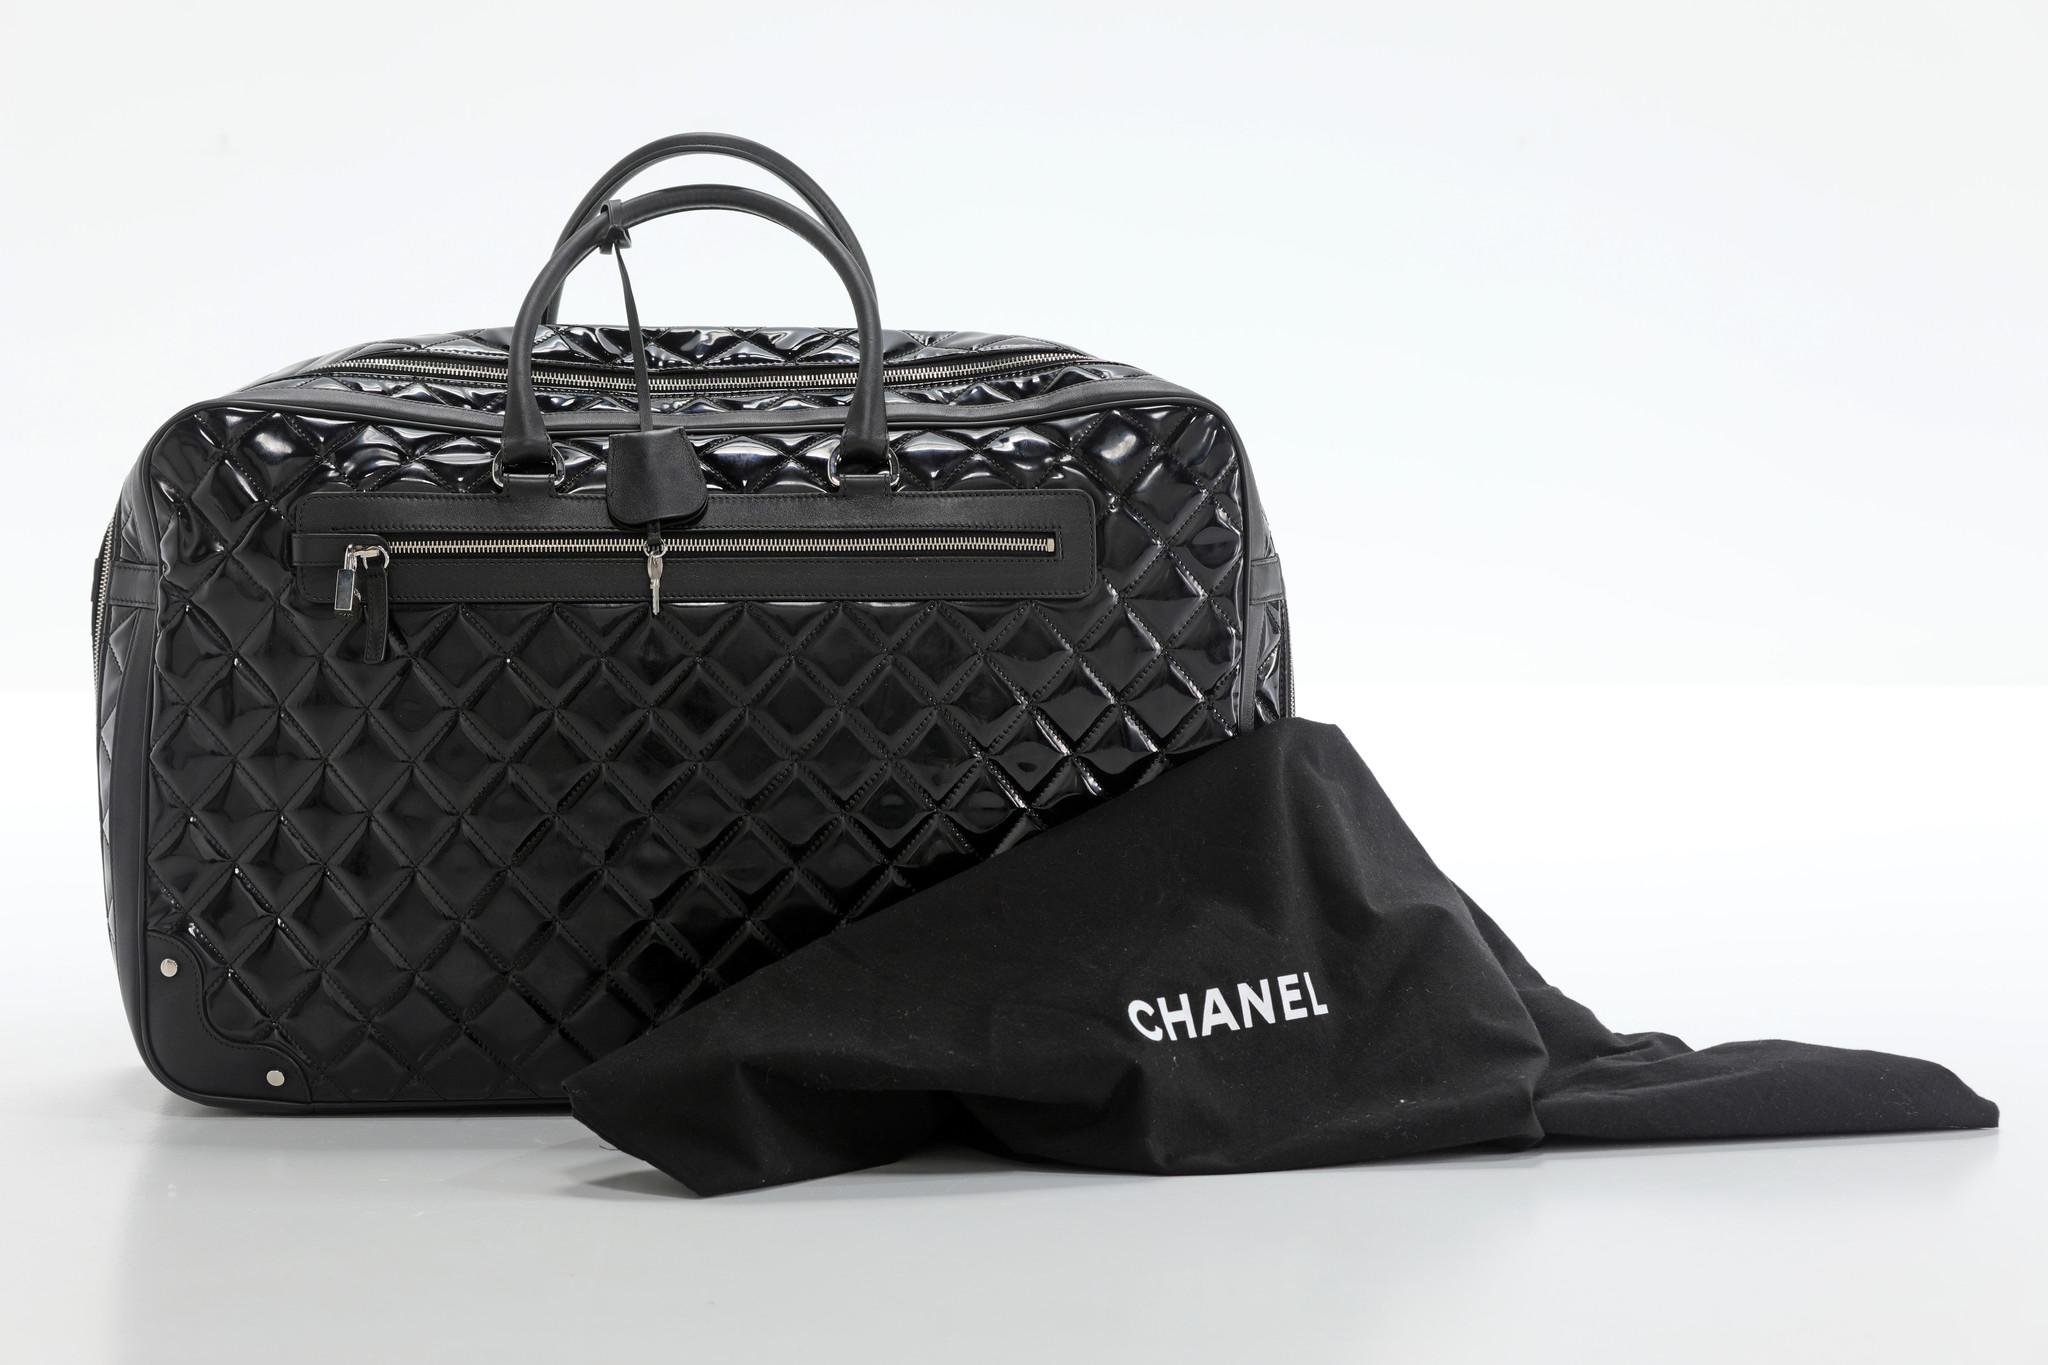 Chanel 2015 Timeless Quilted Carry-on Travel Tote Royal Black Patent Leather Bag For Sale 4